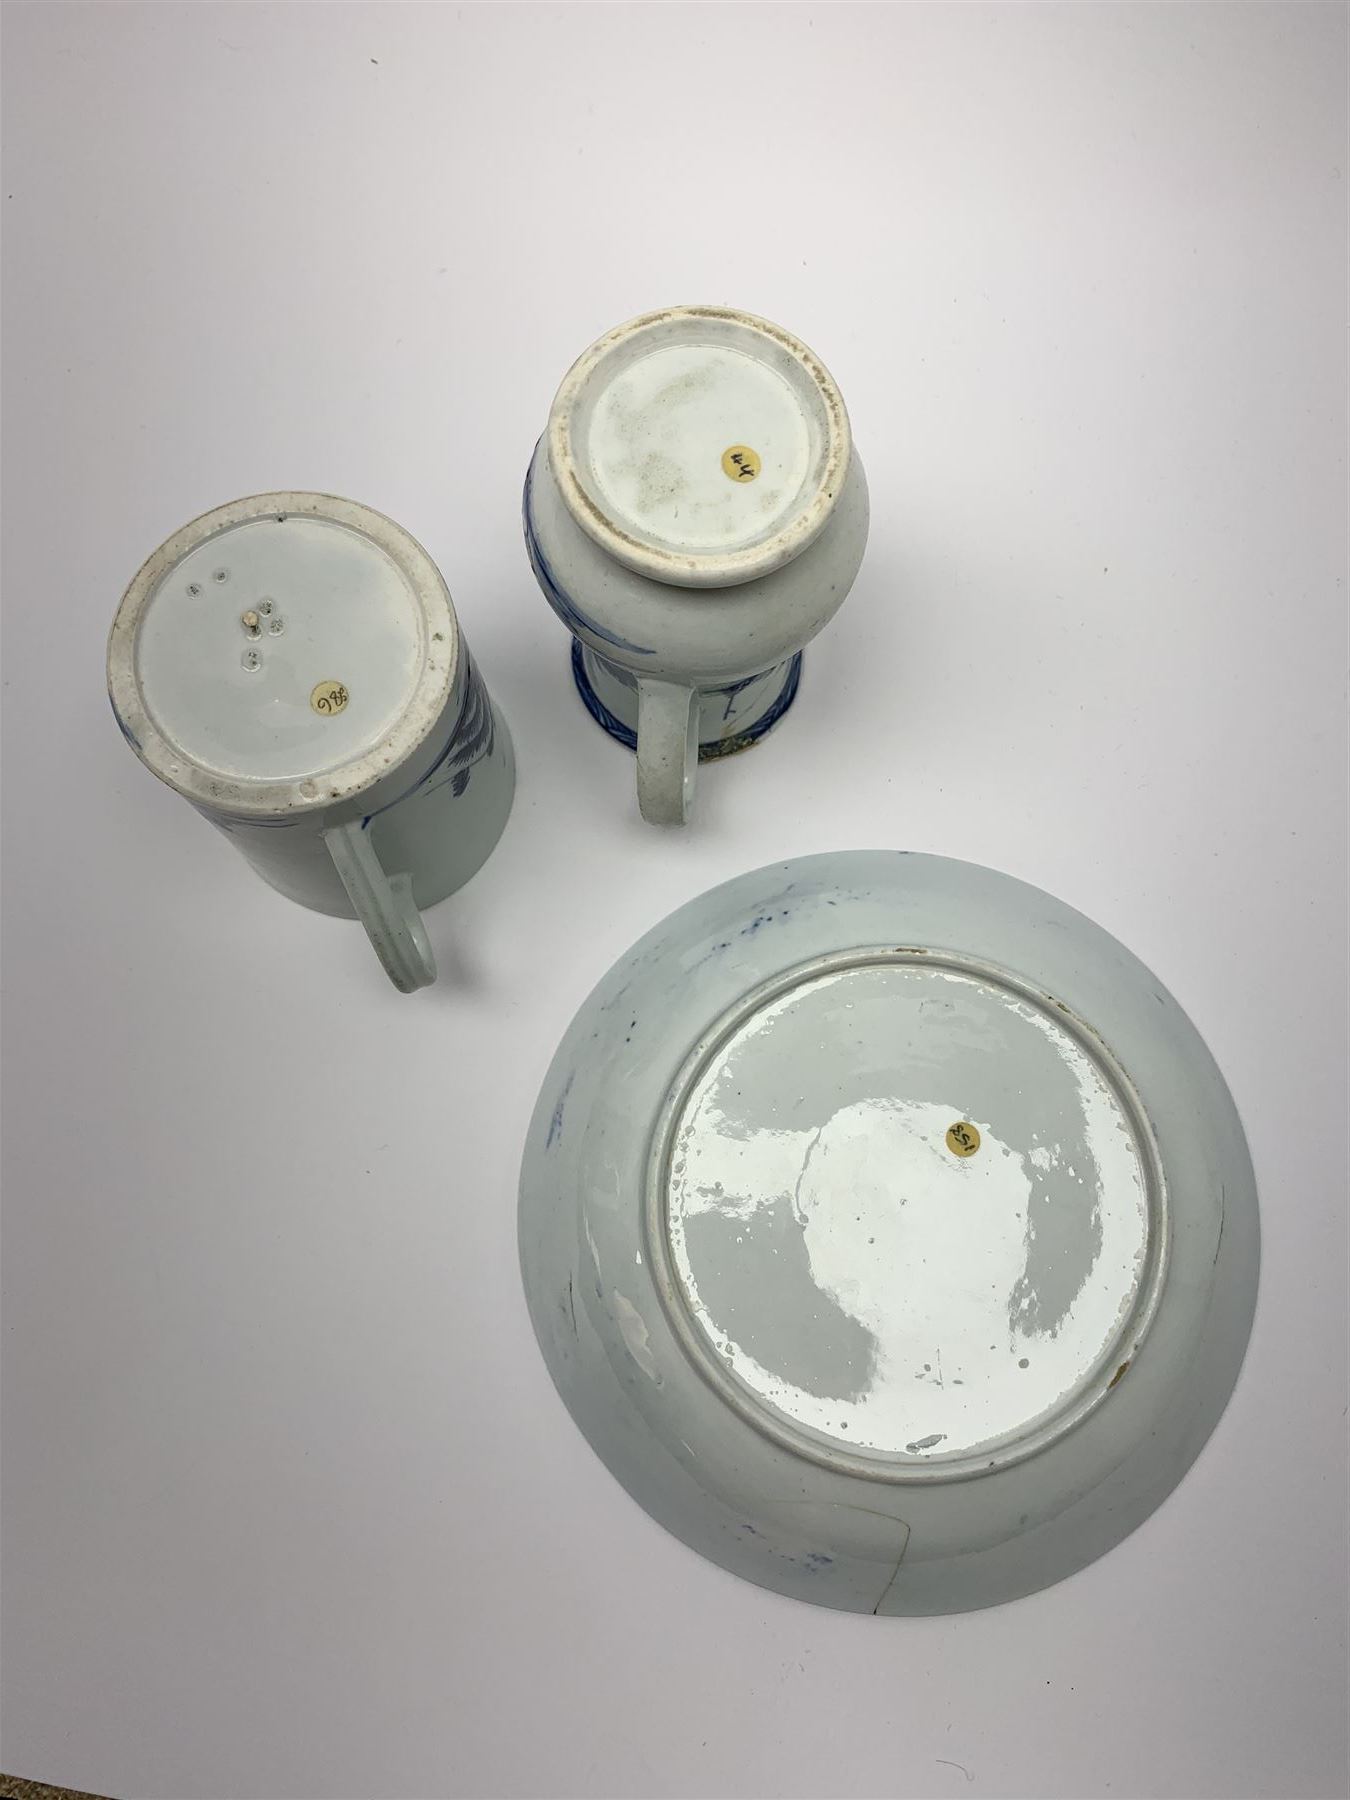 Three pieces of 18th century Liverpool Richard Chaffers porcelain - Image 5 of 5